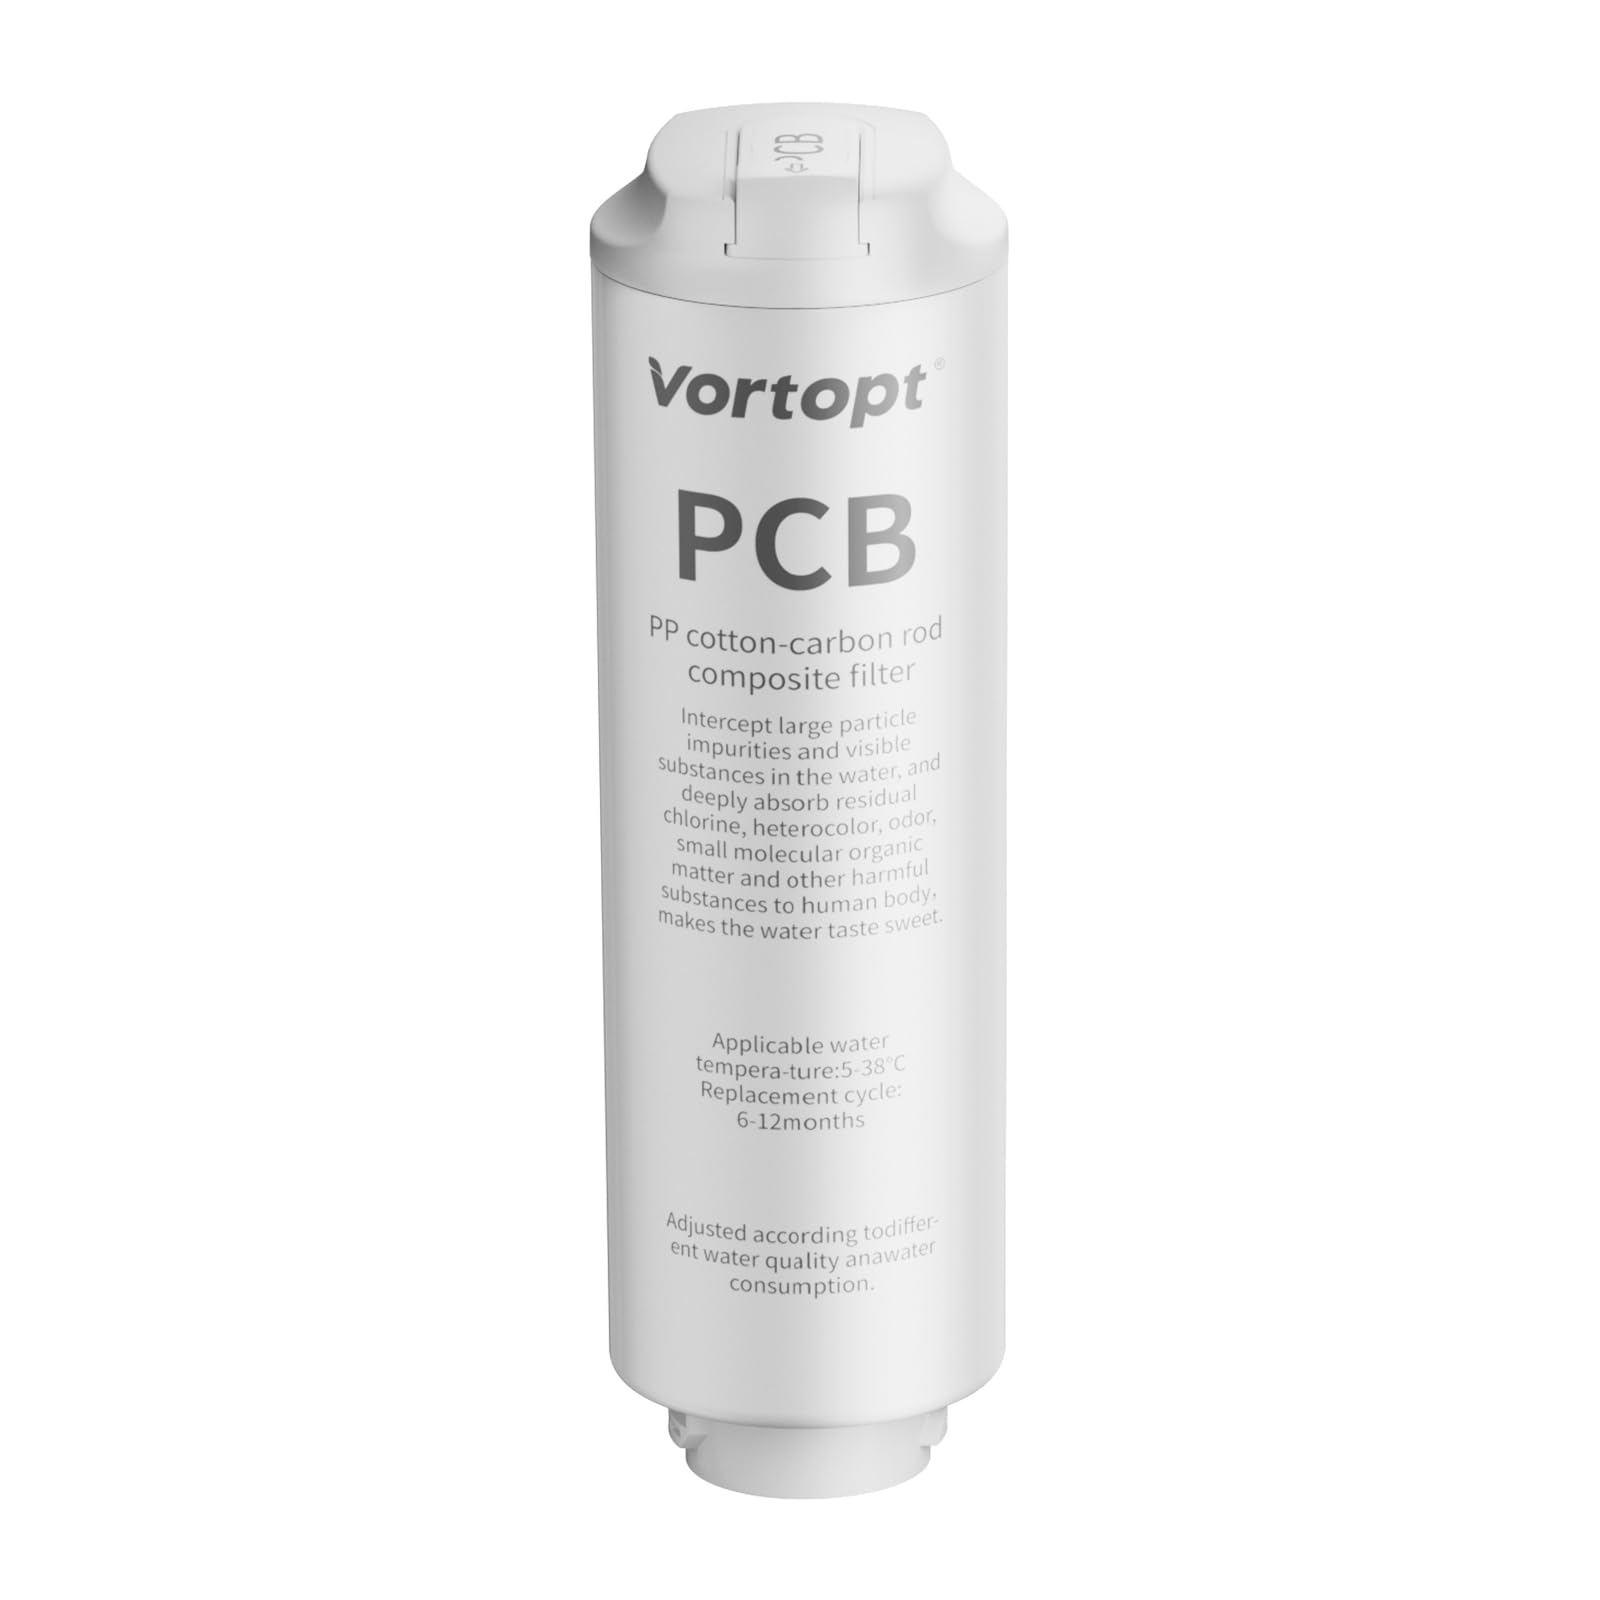 PCB Replacement Filter Compatible with DR3 Reverse Osmosis Water Filter System,Vortopt 